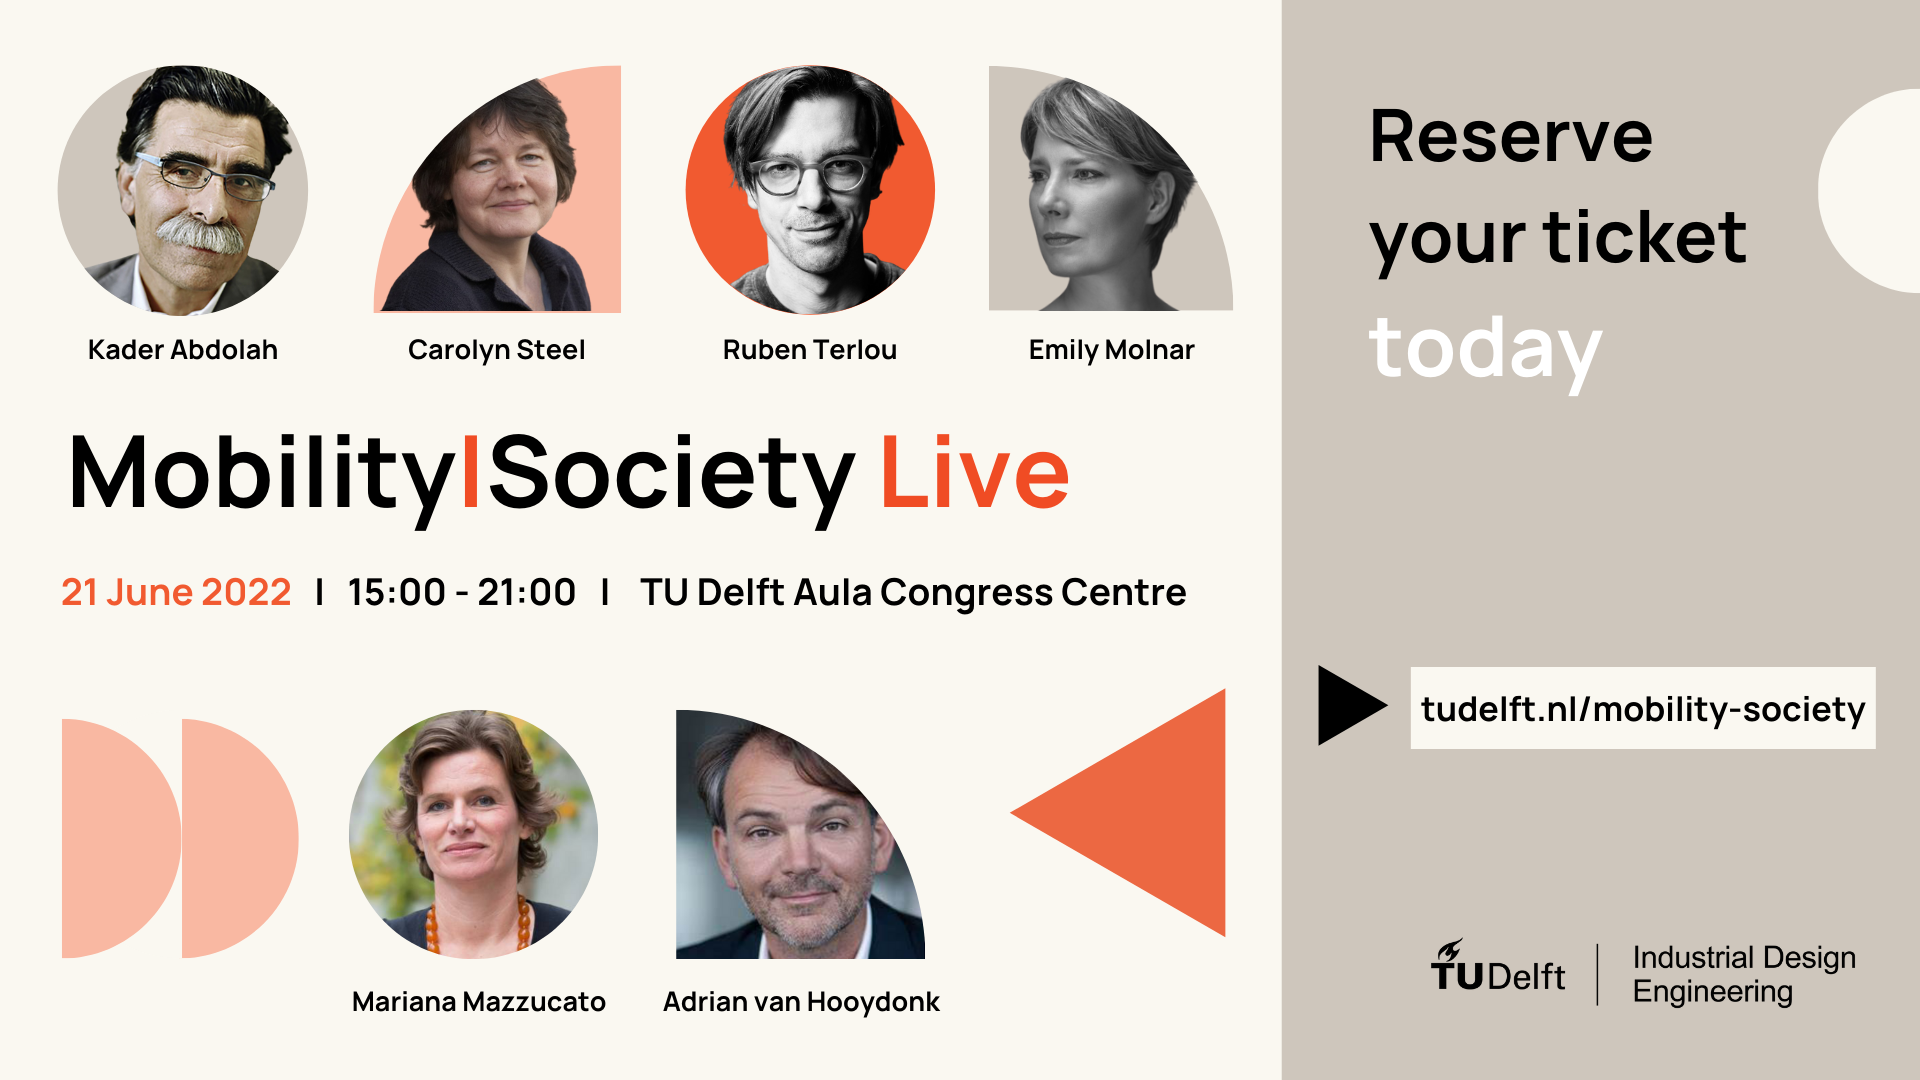 [Translate to English:] Register your ticket for Mobility Society LIVE on 21 June 2022